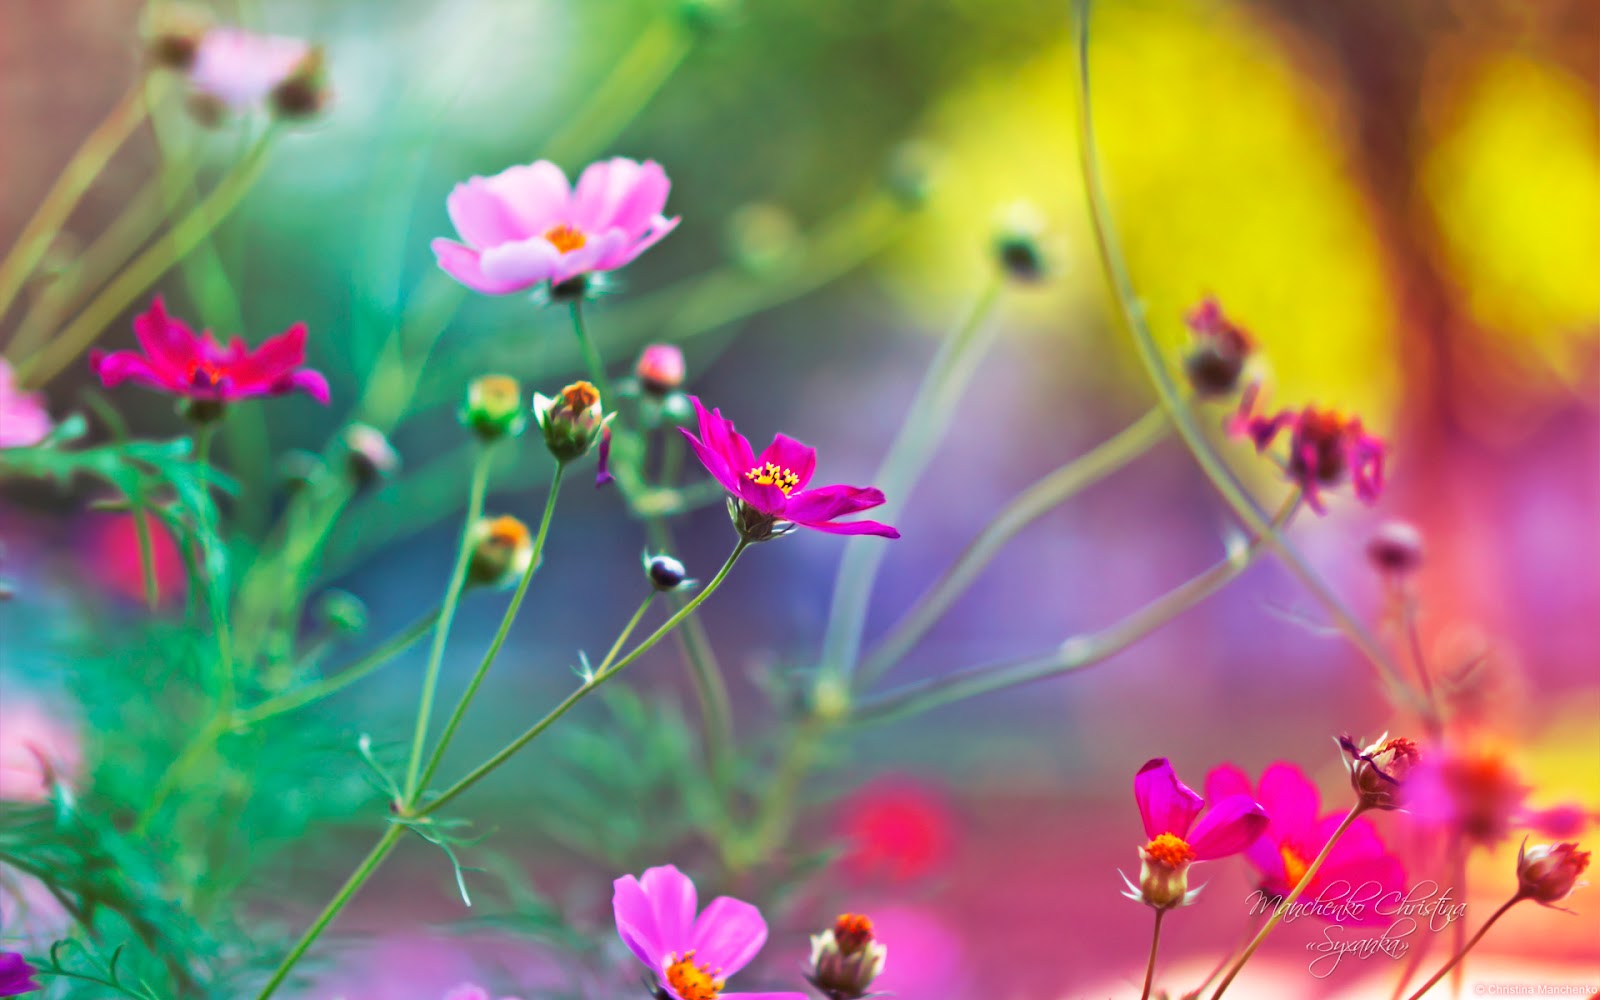 Beautiful nature and flowers wallpaper download free